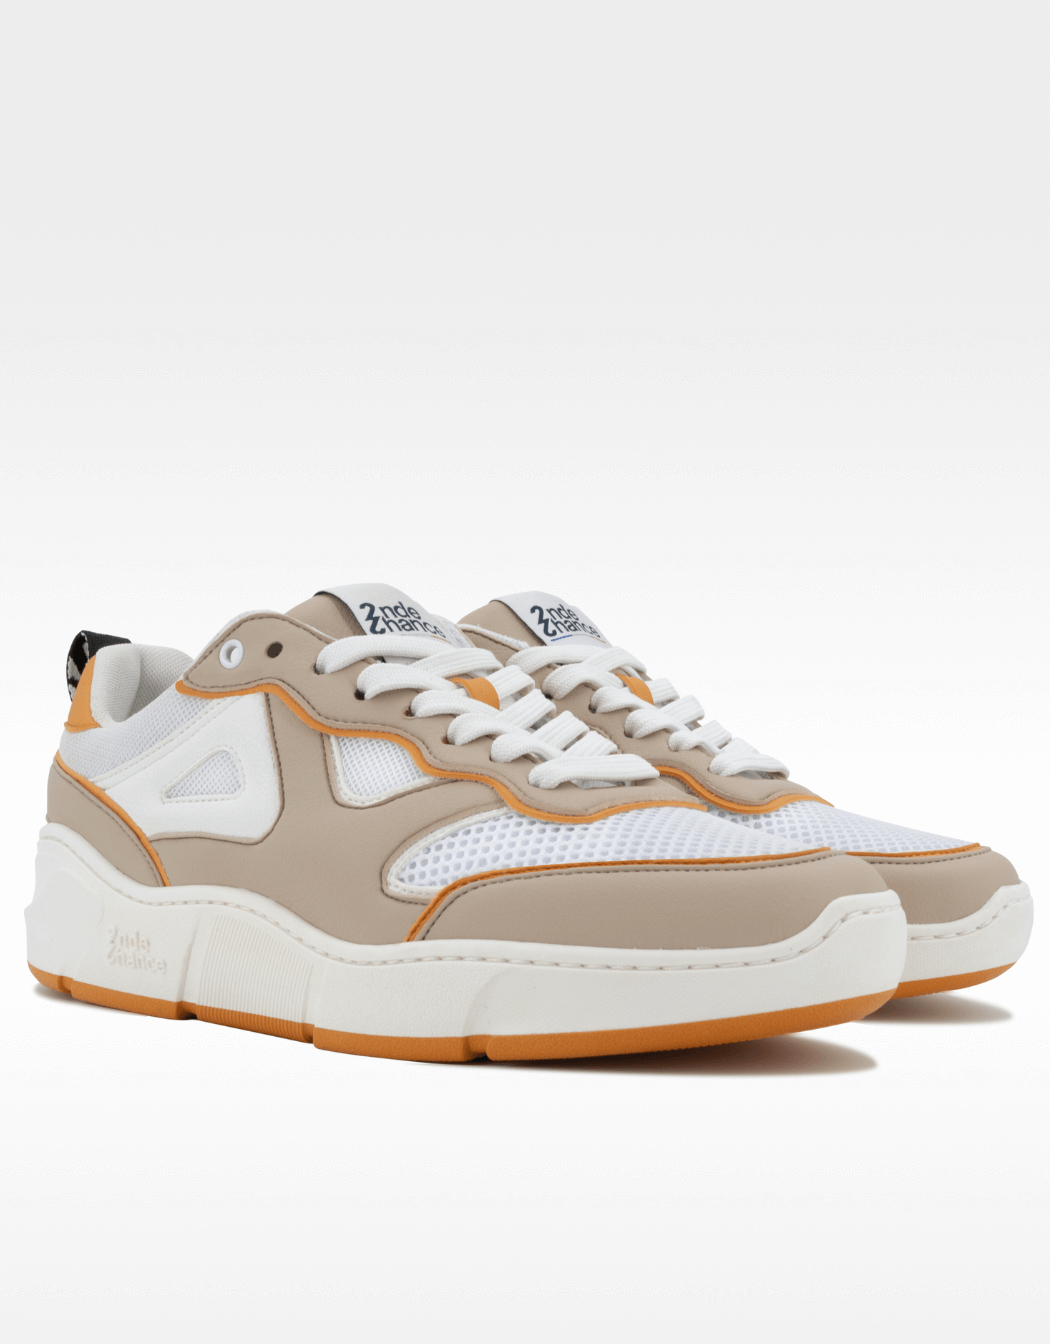 sneakers-neo-loopr3-2ndechance-camel-recyclees-recyclable-madeinfrance-3-4